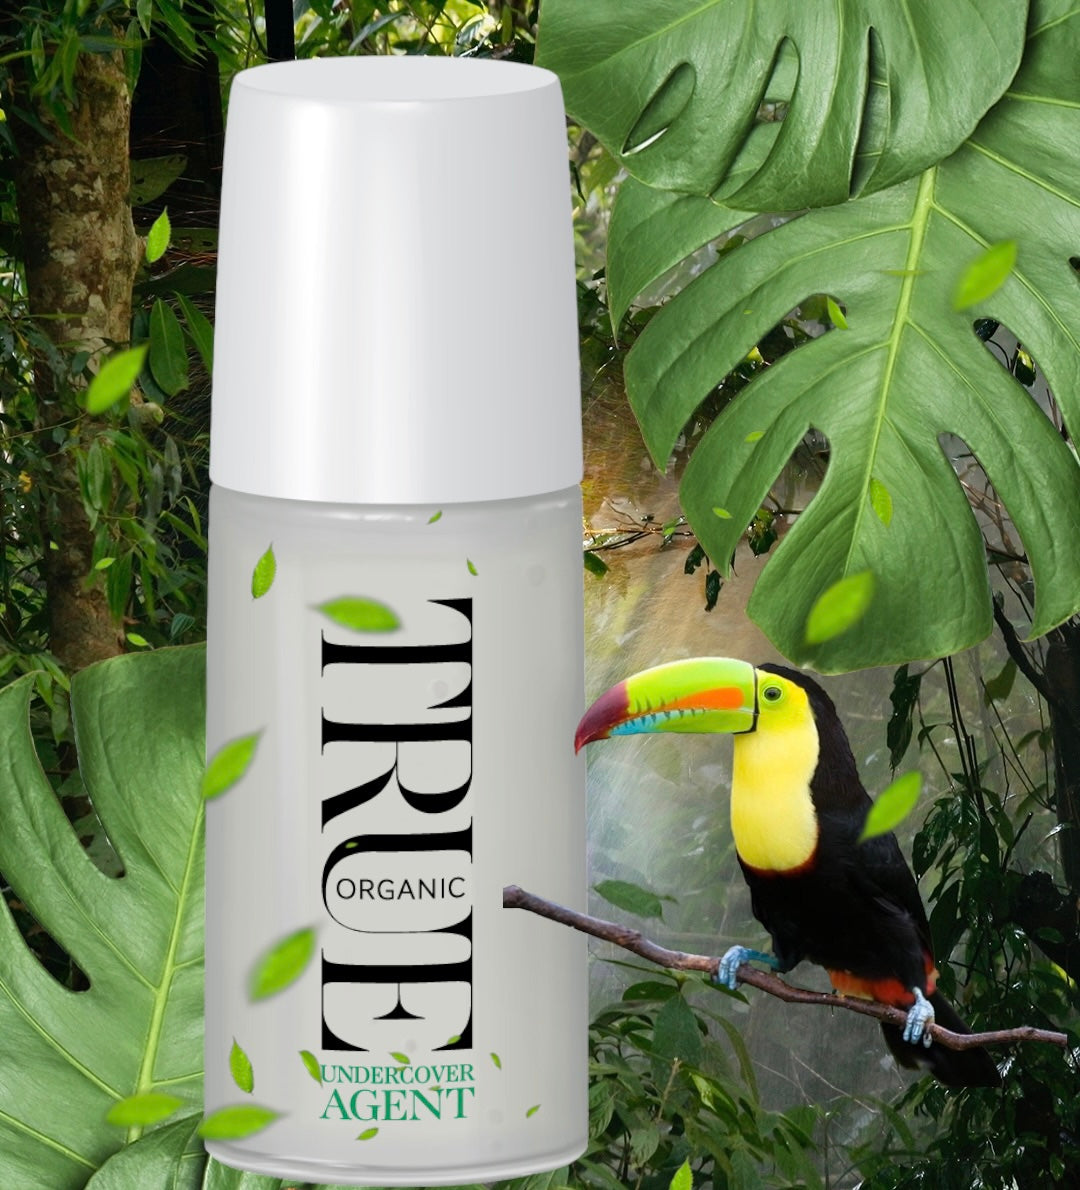 Undercover agent deodorant- Finally a natural deodorant that works